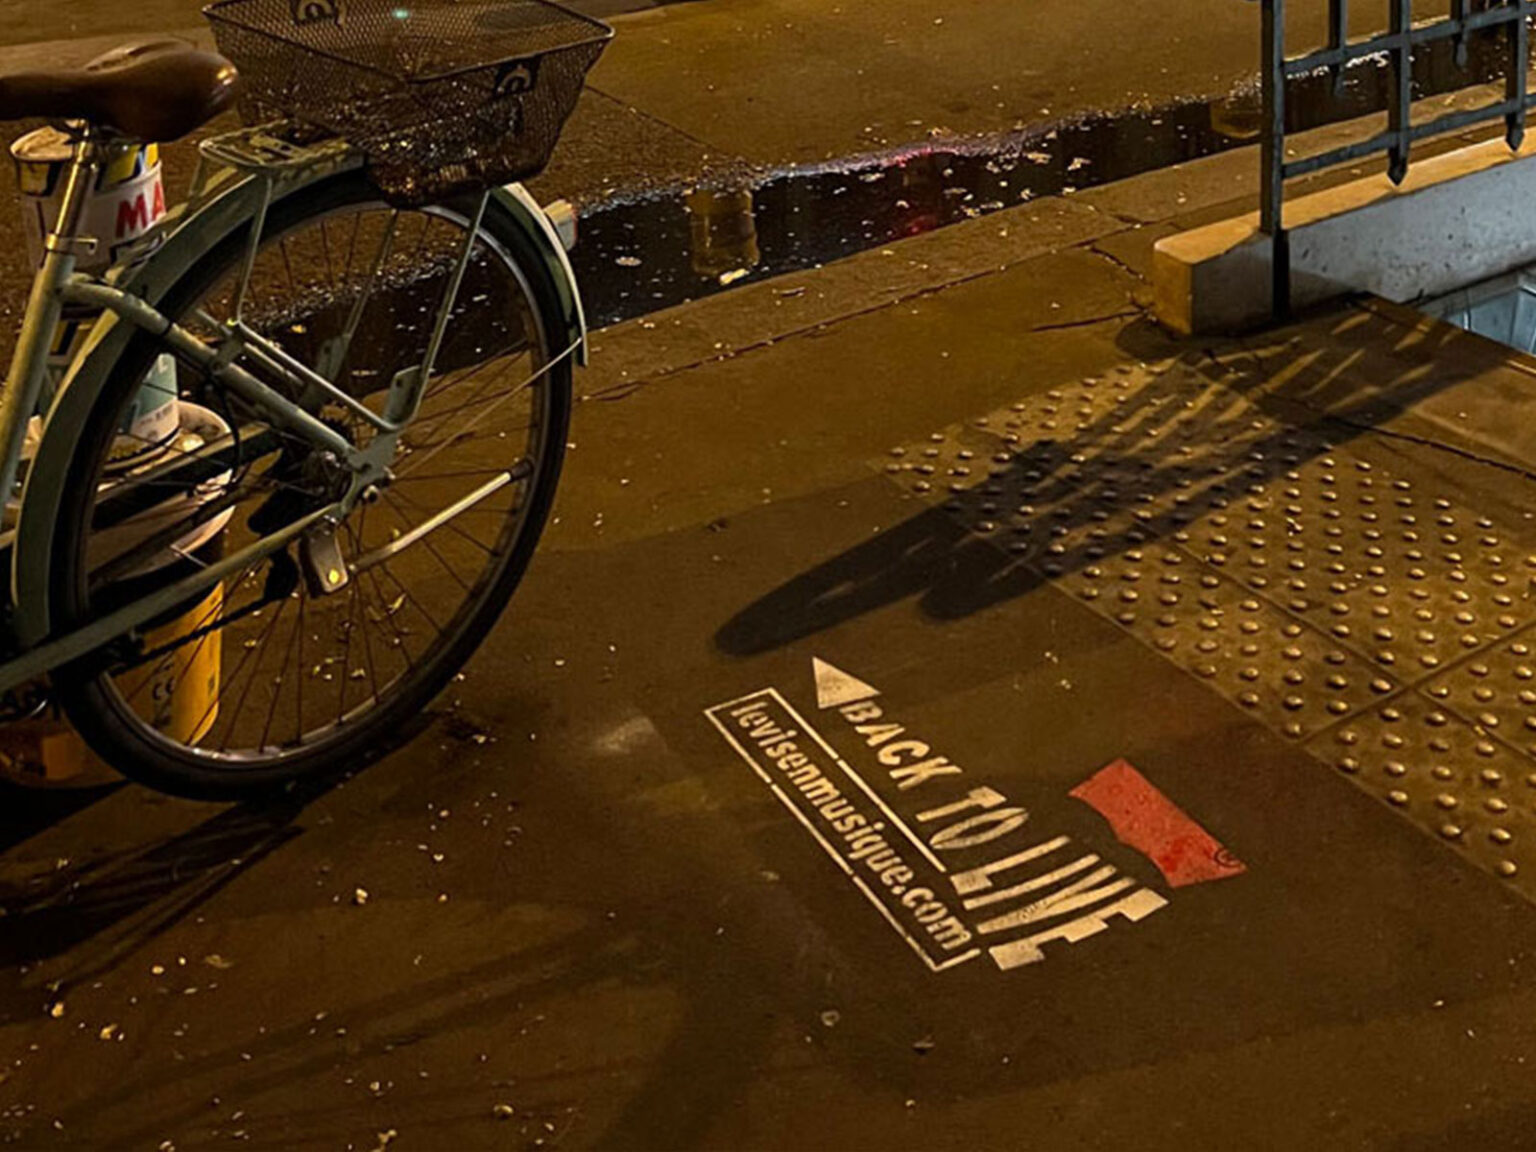 Levi-clean-tag-tapage-medias-street-guerilla-marketing-campagne-publicitaire-communication-france